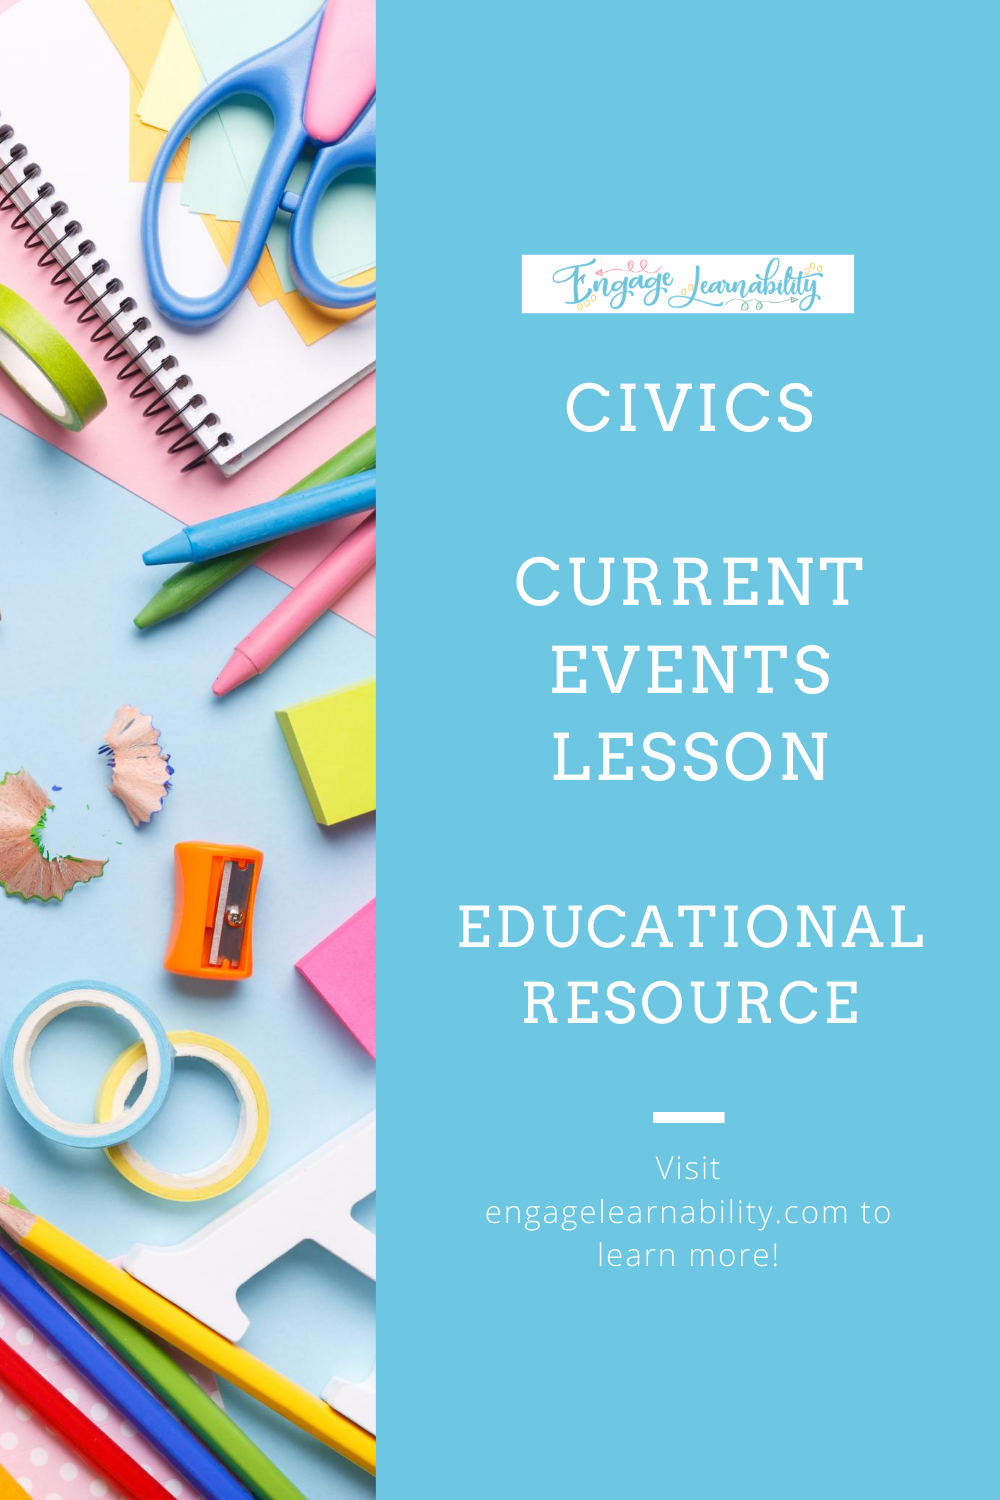 Engage Learnability Civics and American Government Current Events Lesson